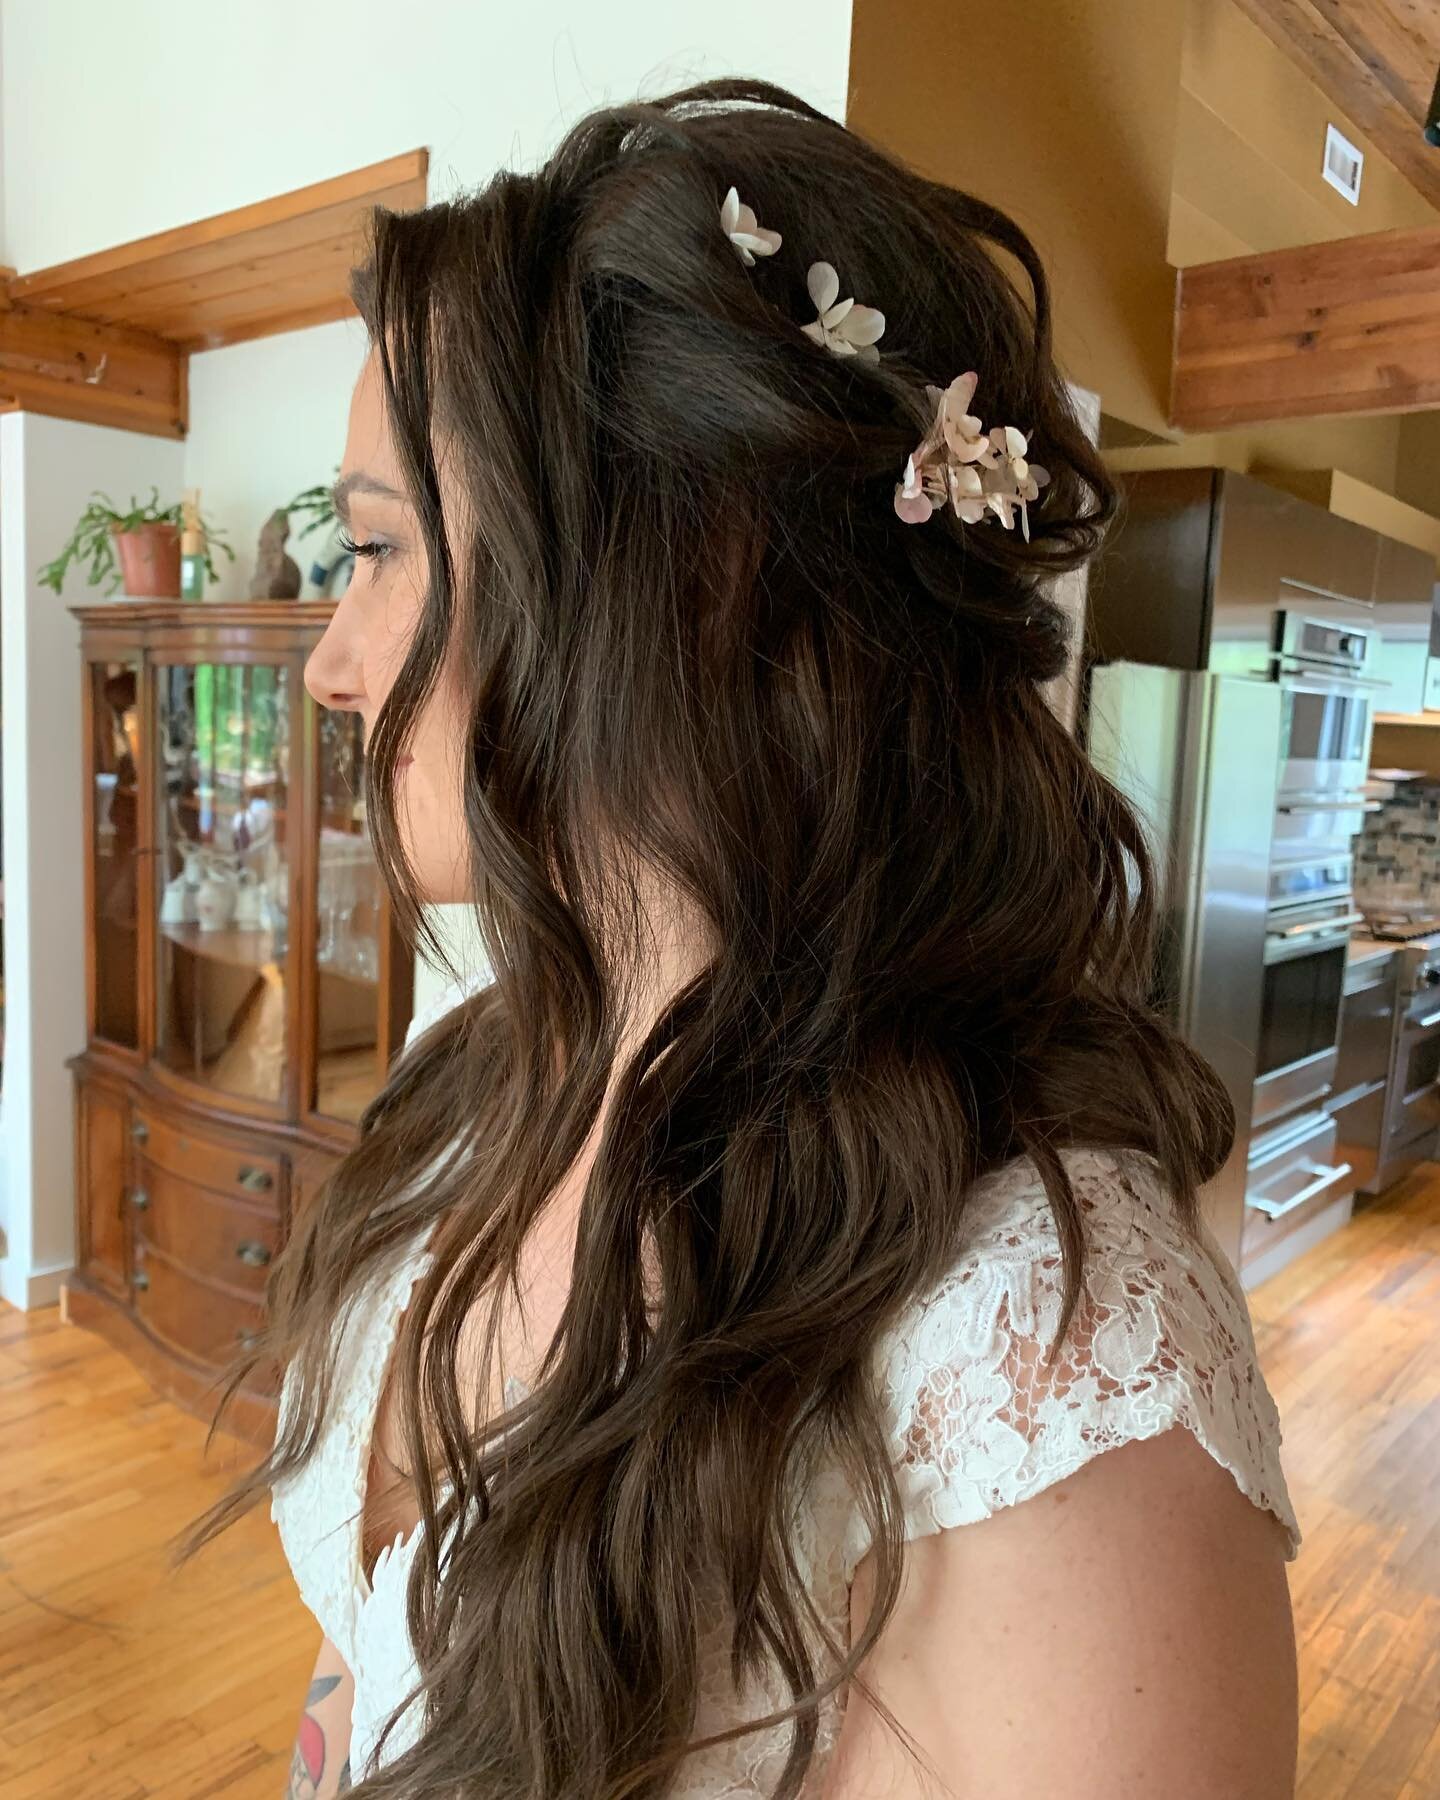 The Most Perfect Boho Hairstyle🌿 The pink hydrangeas are everything 🌸 🫶🏻 

Fresh florals are a great way to create a more romantic and ethereal hairstyle for your wedding day 💍 

Hair: @sincerelysomethingborrowed 
Venue: @thesurflodge 
Getting R